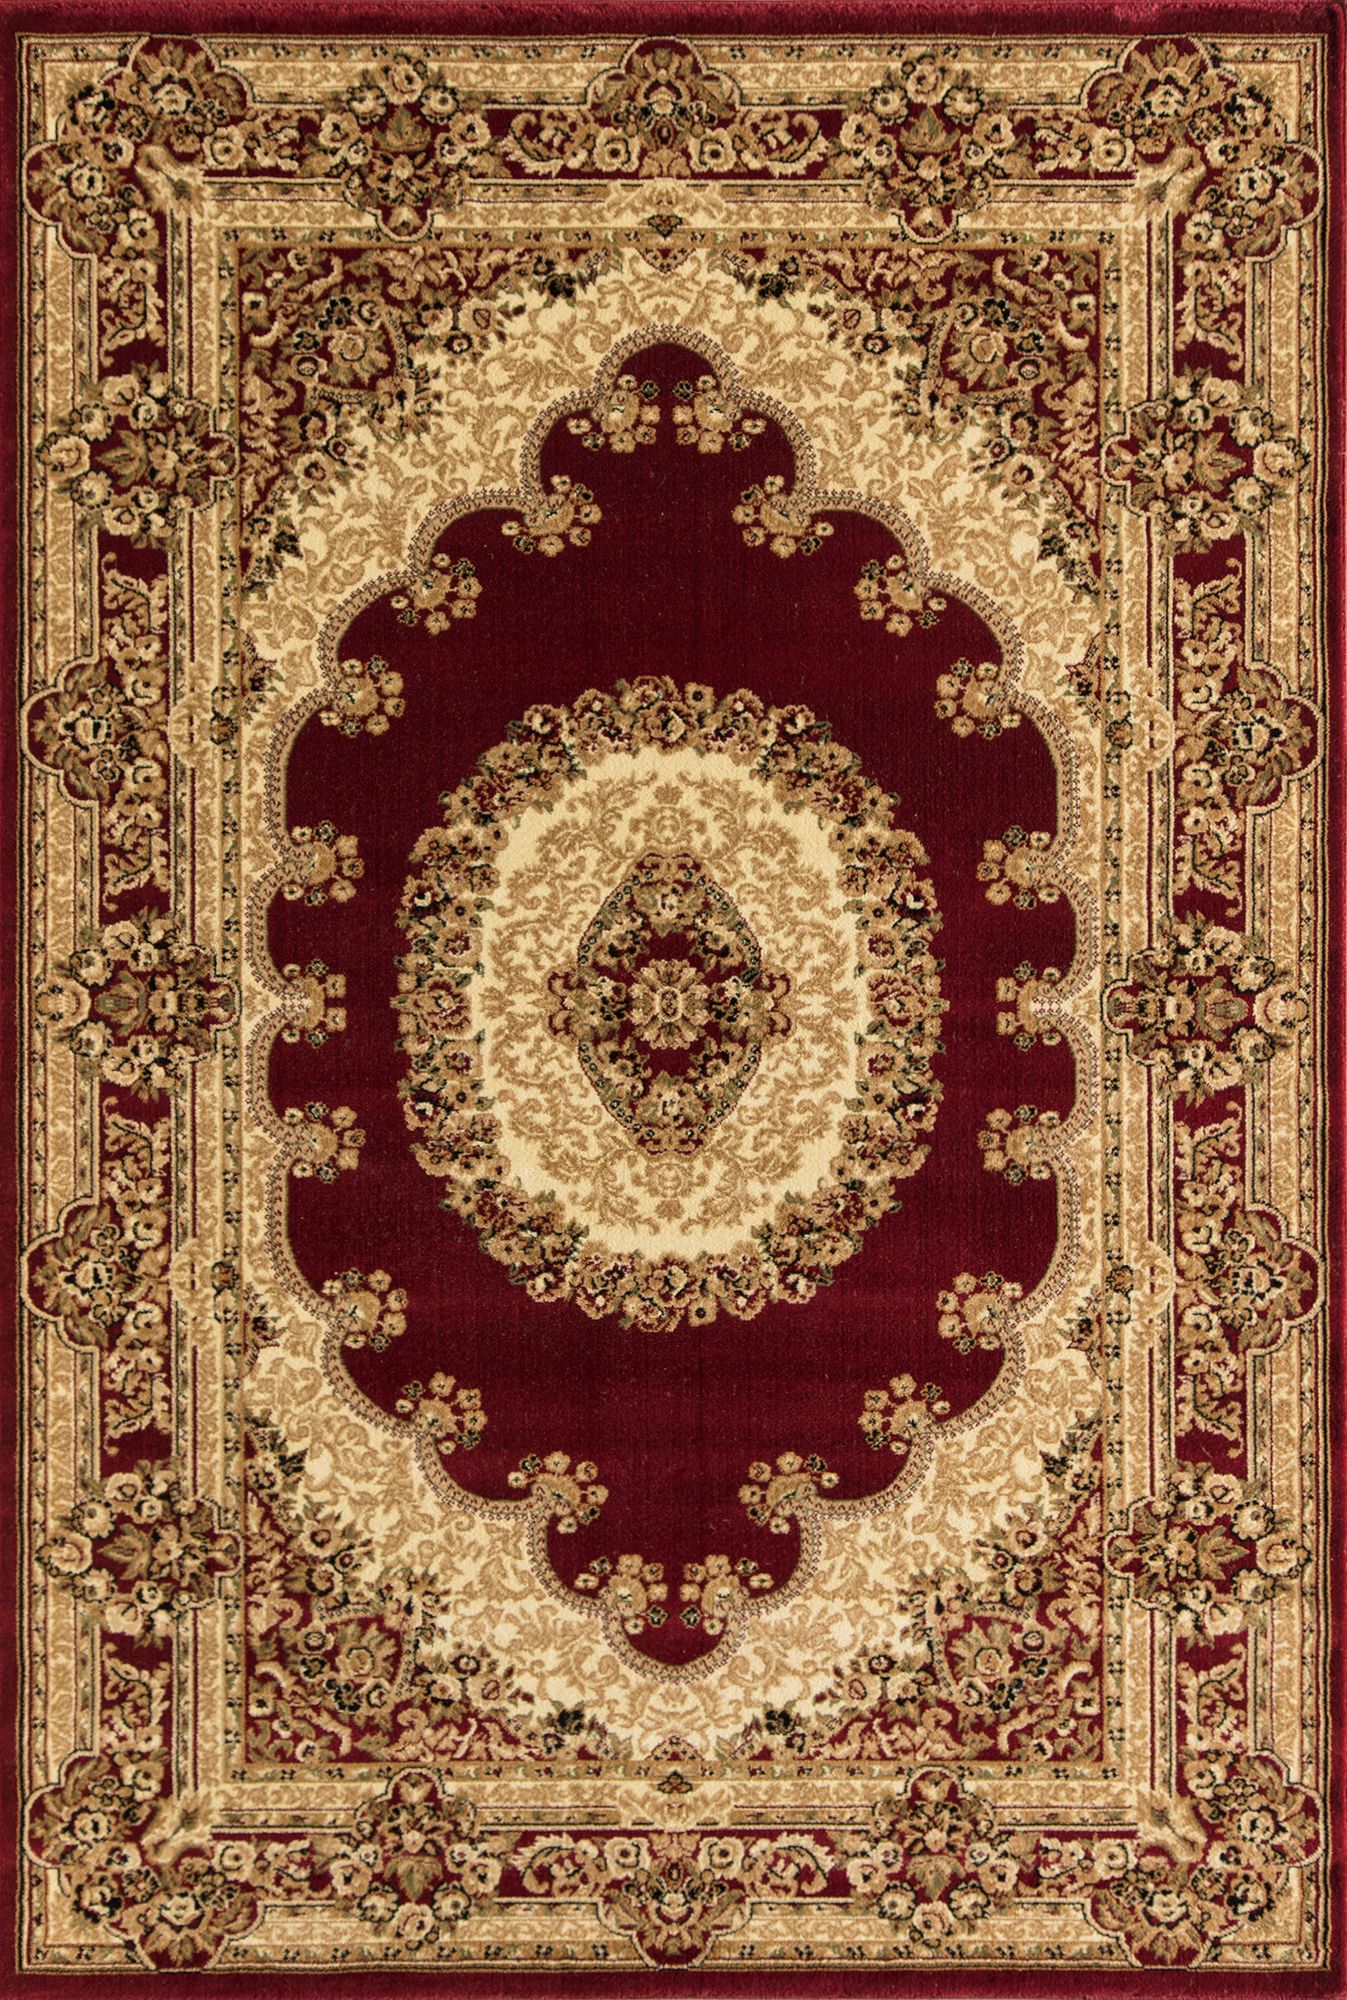 Rugs America Vista 807-RED Kerman Red Oriental Traditional Red Area Rug, 9'10"x13'2" - image 4 of 5